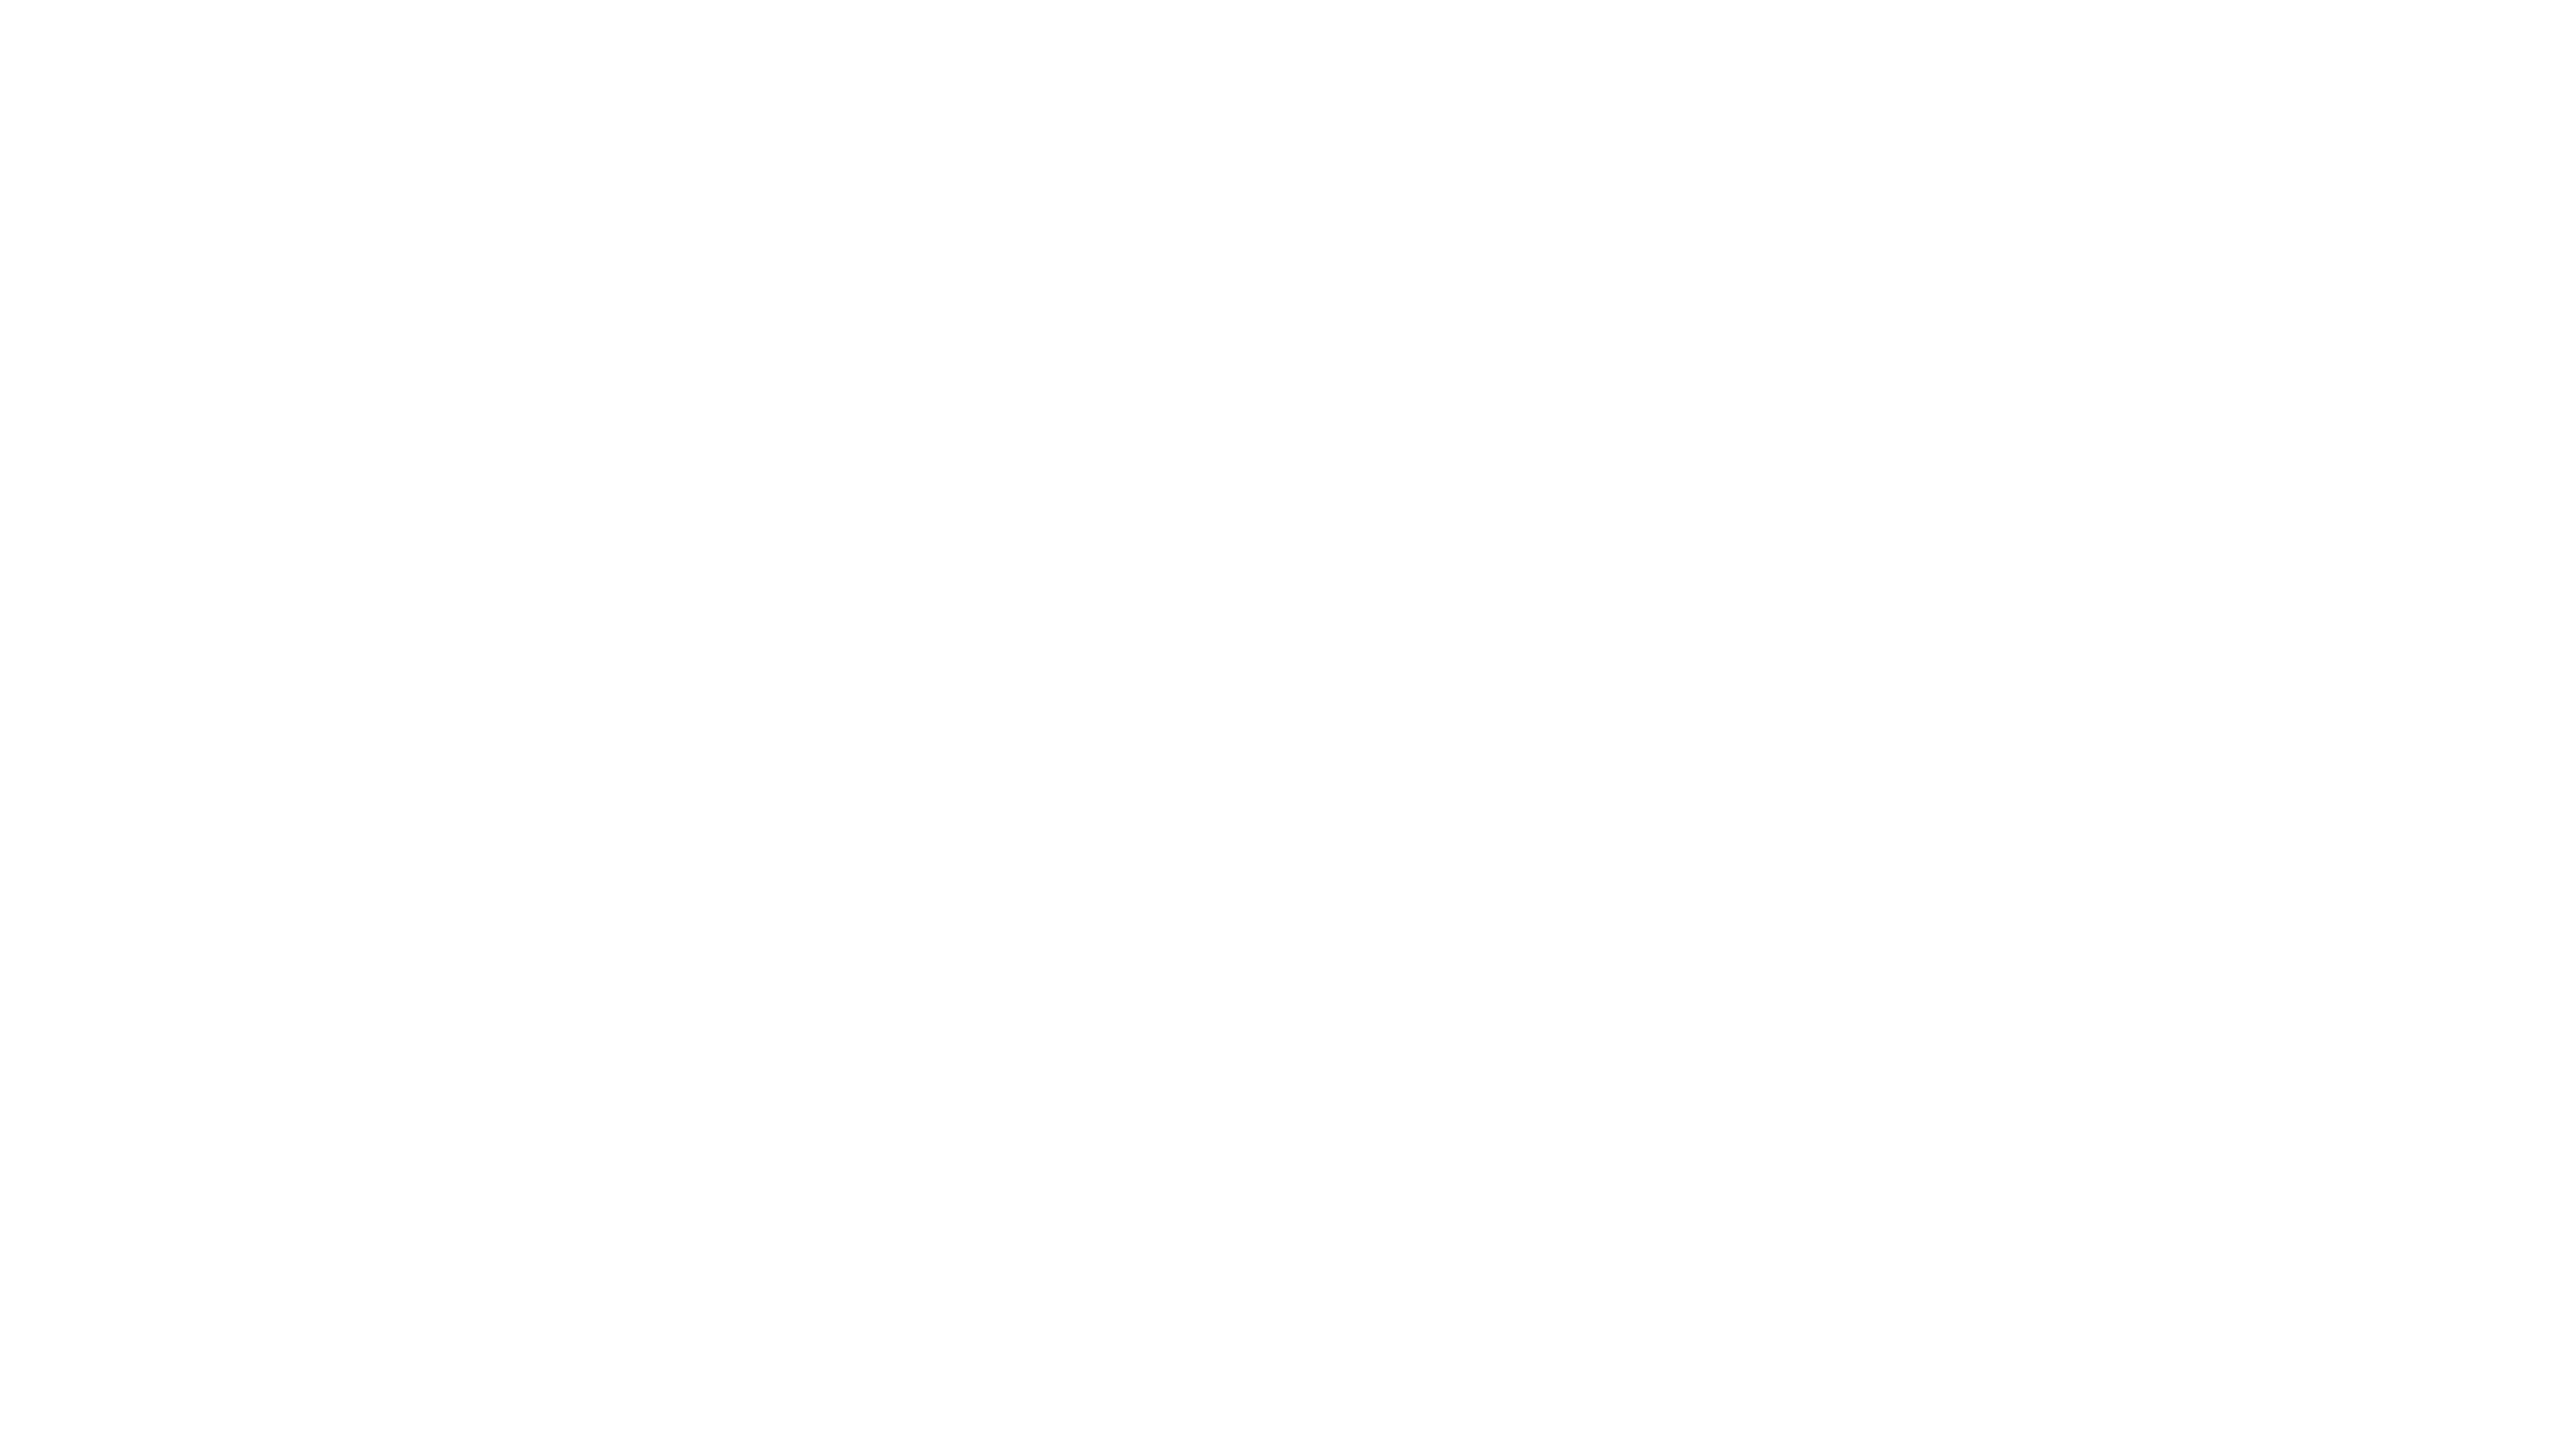 Open Gate International Film Festival Official Selection LOVED The Movie